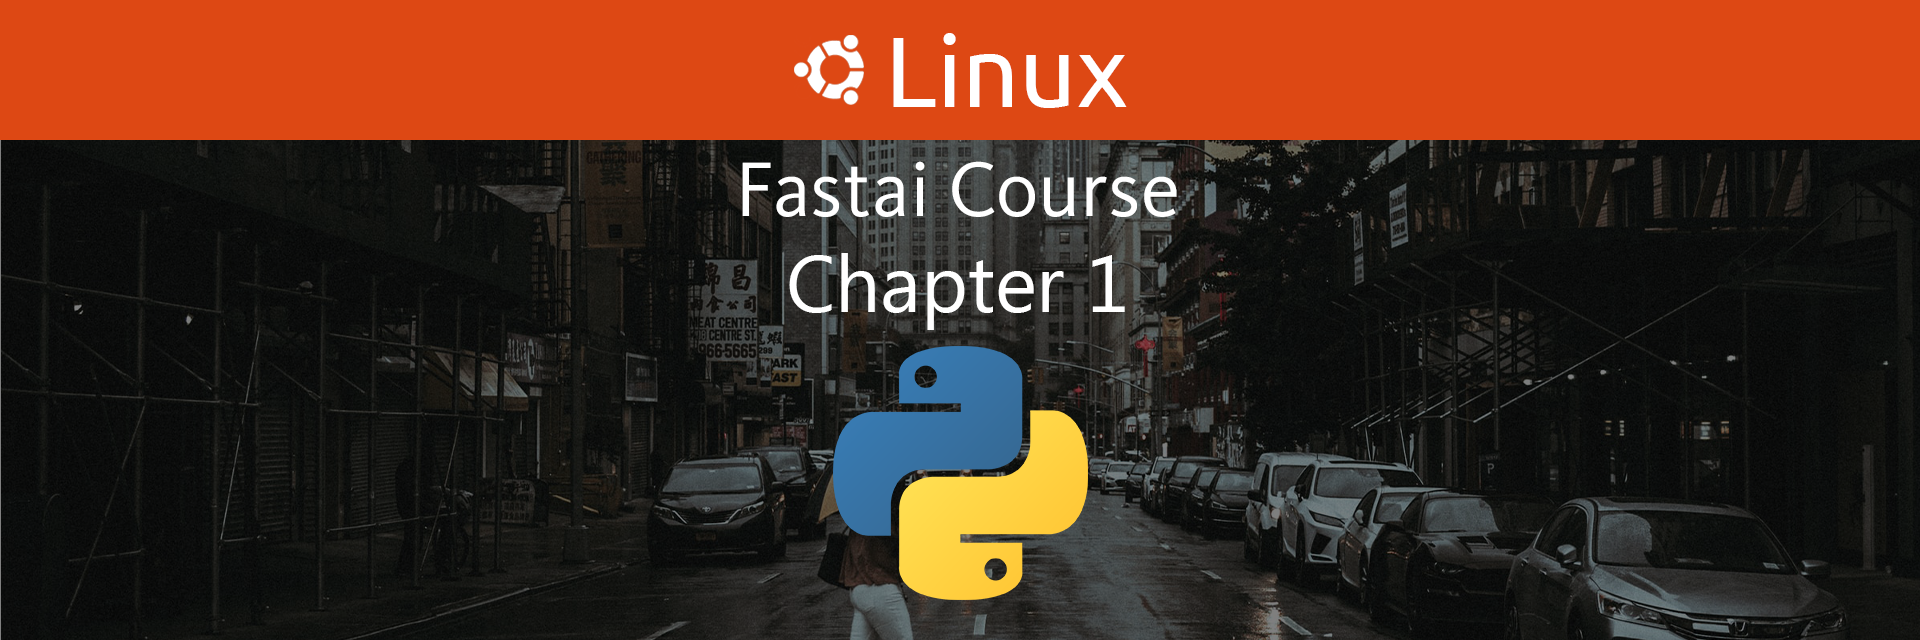 Fastai Course Chapter 1 on Linux